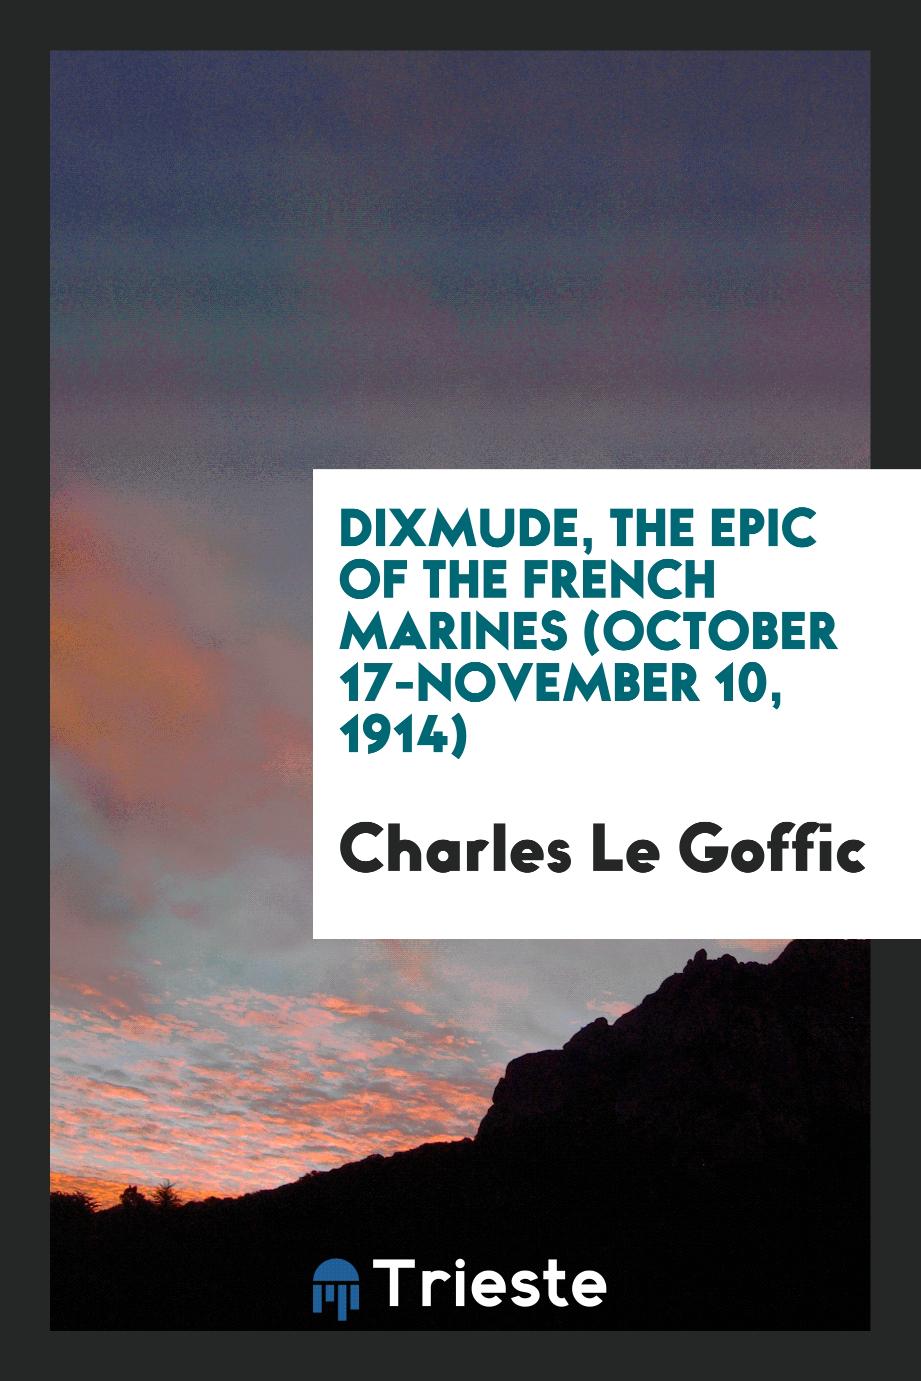 Dixmude, the epic of the French marines (October 17-November 10, 1914)